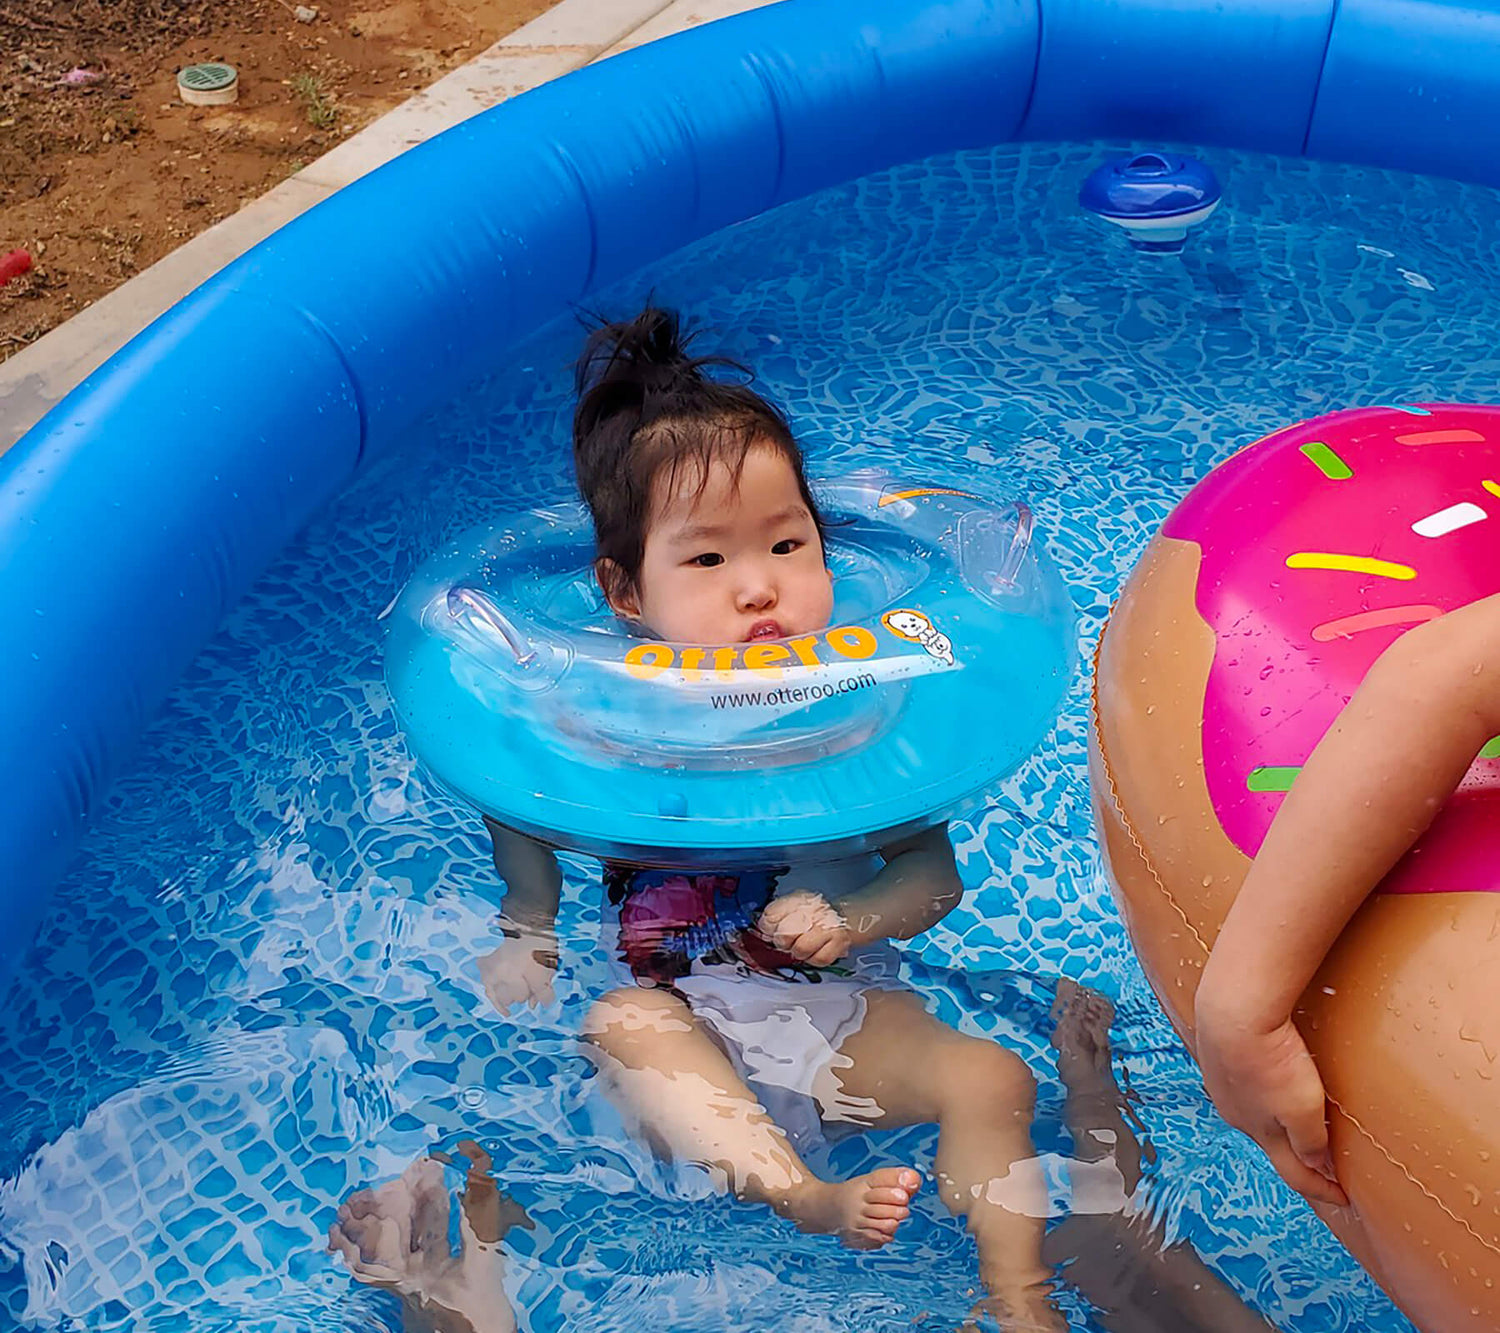 Toddler with Rare Genetic Condition Can Reach Milestones When in Water